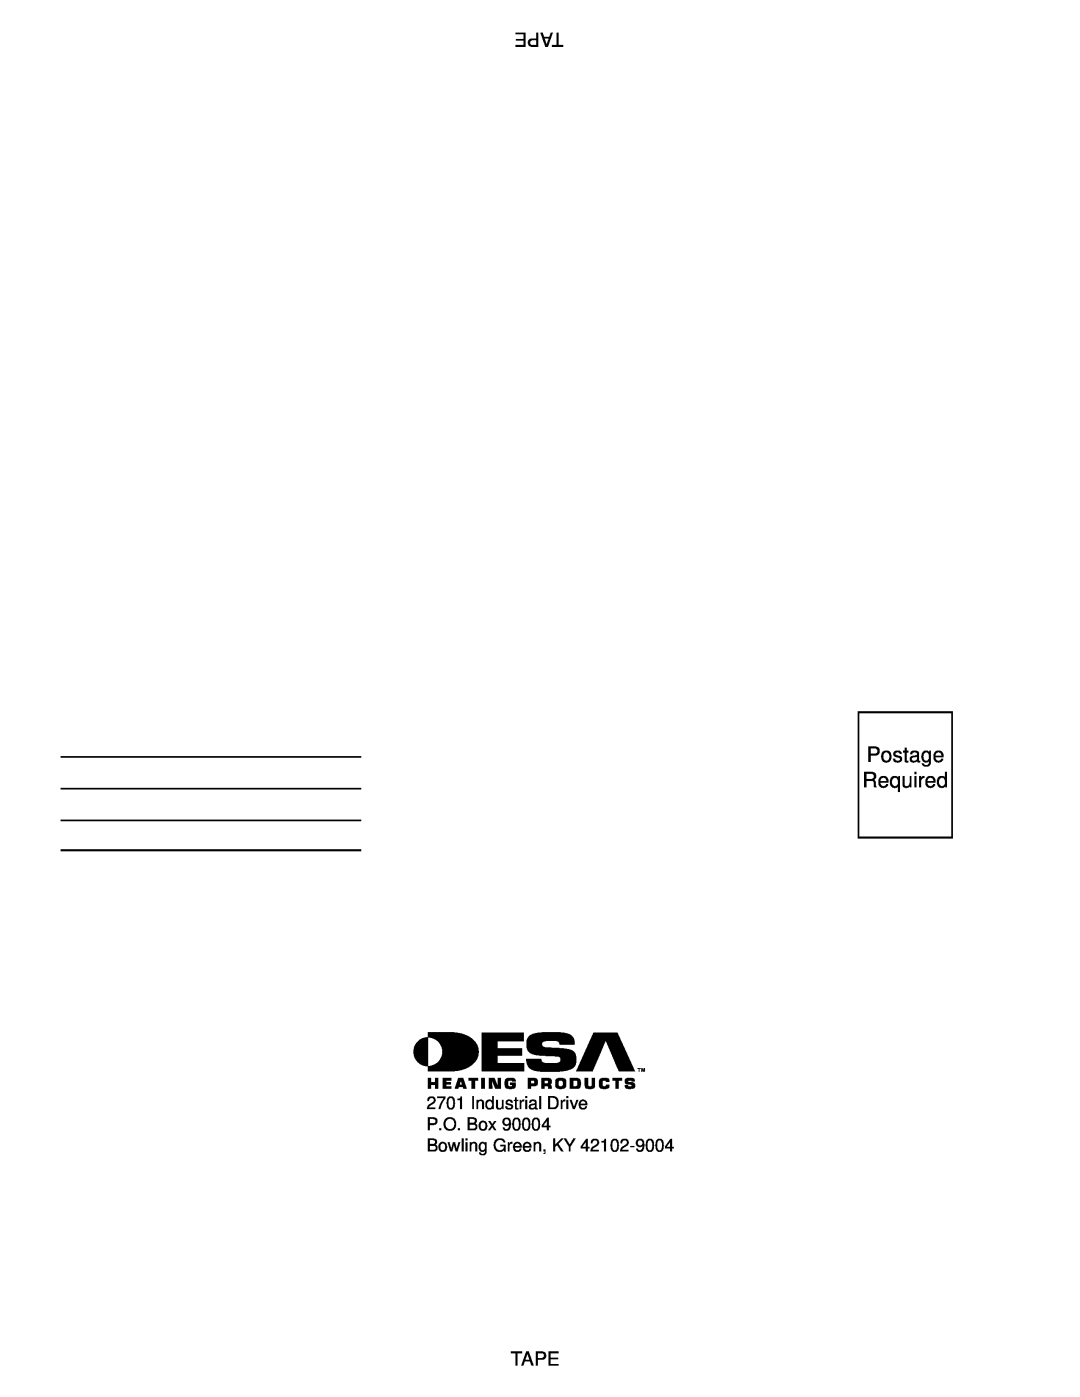 Desa PROPANE CONSTRUCTION CONVECTION HEATER Postage Required, Tape, Industrial Drive P.O. Box Bowling Green, KY 